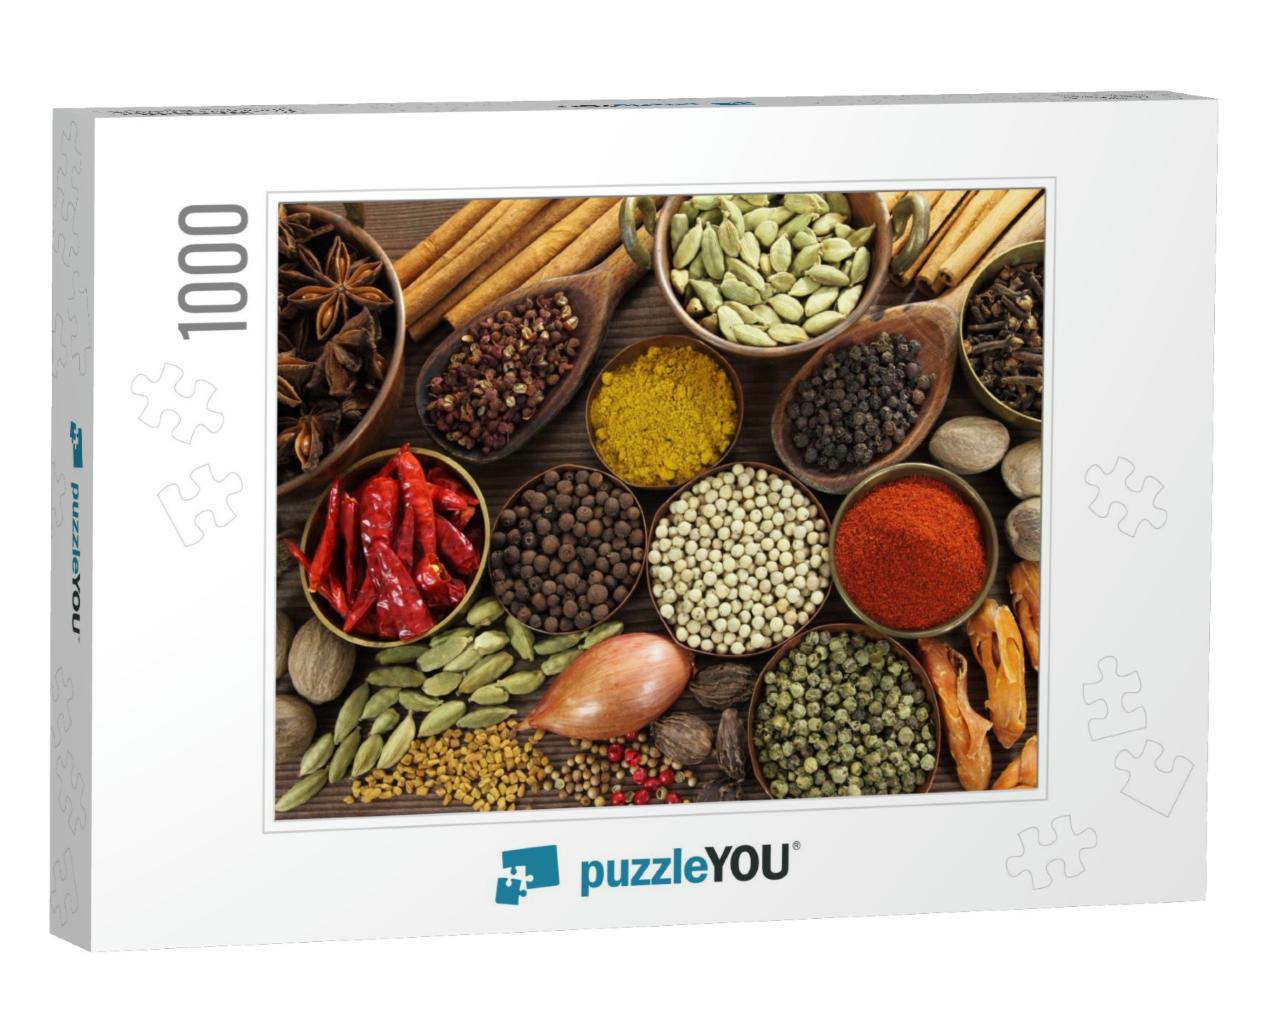 Spices & Herbs in Metal Bowls & Wooden Spoons. Food & Cui... Jigsaw Puzzle with 1000 pieces